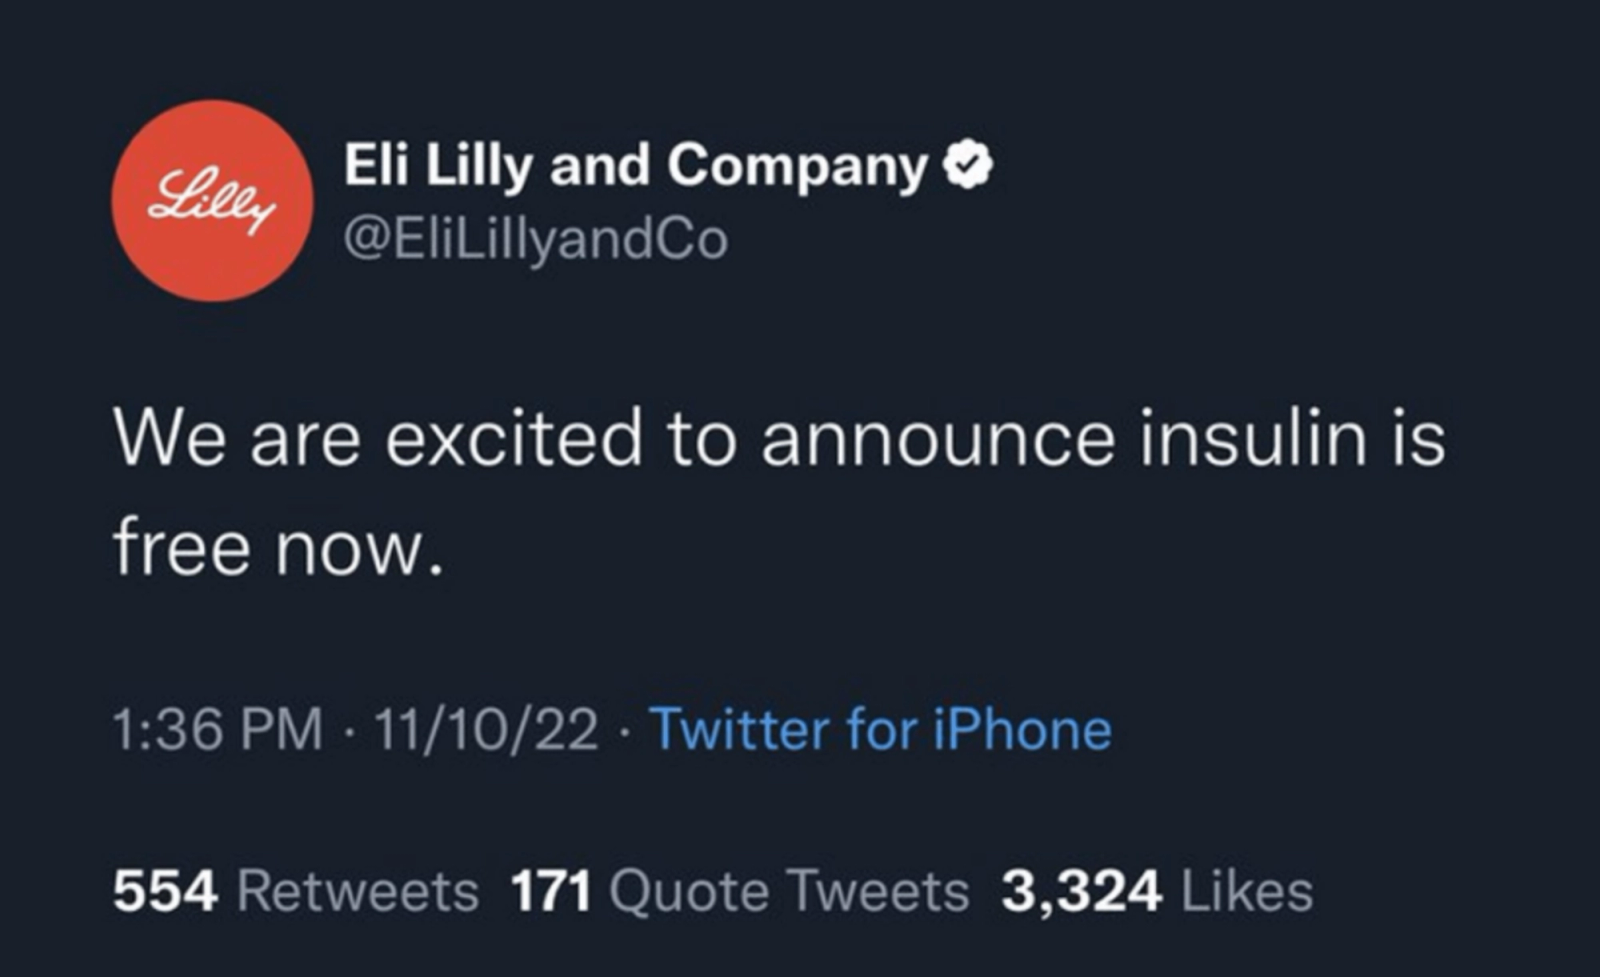 Screenshot of a fake tweet from a Twitter account impersonating Eli Lilly